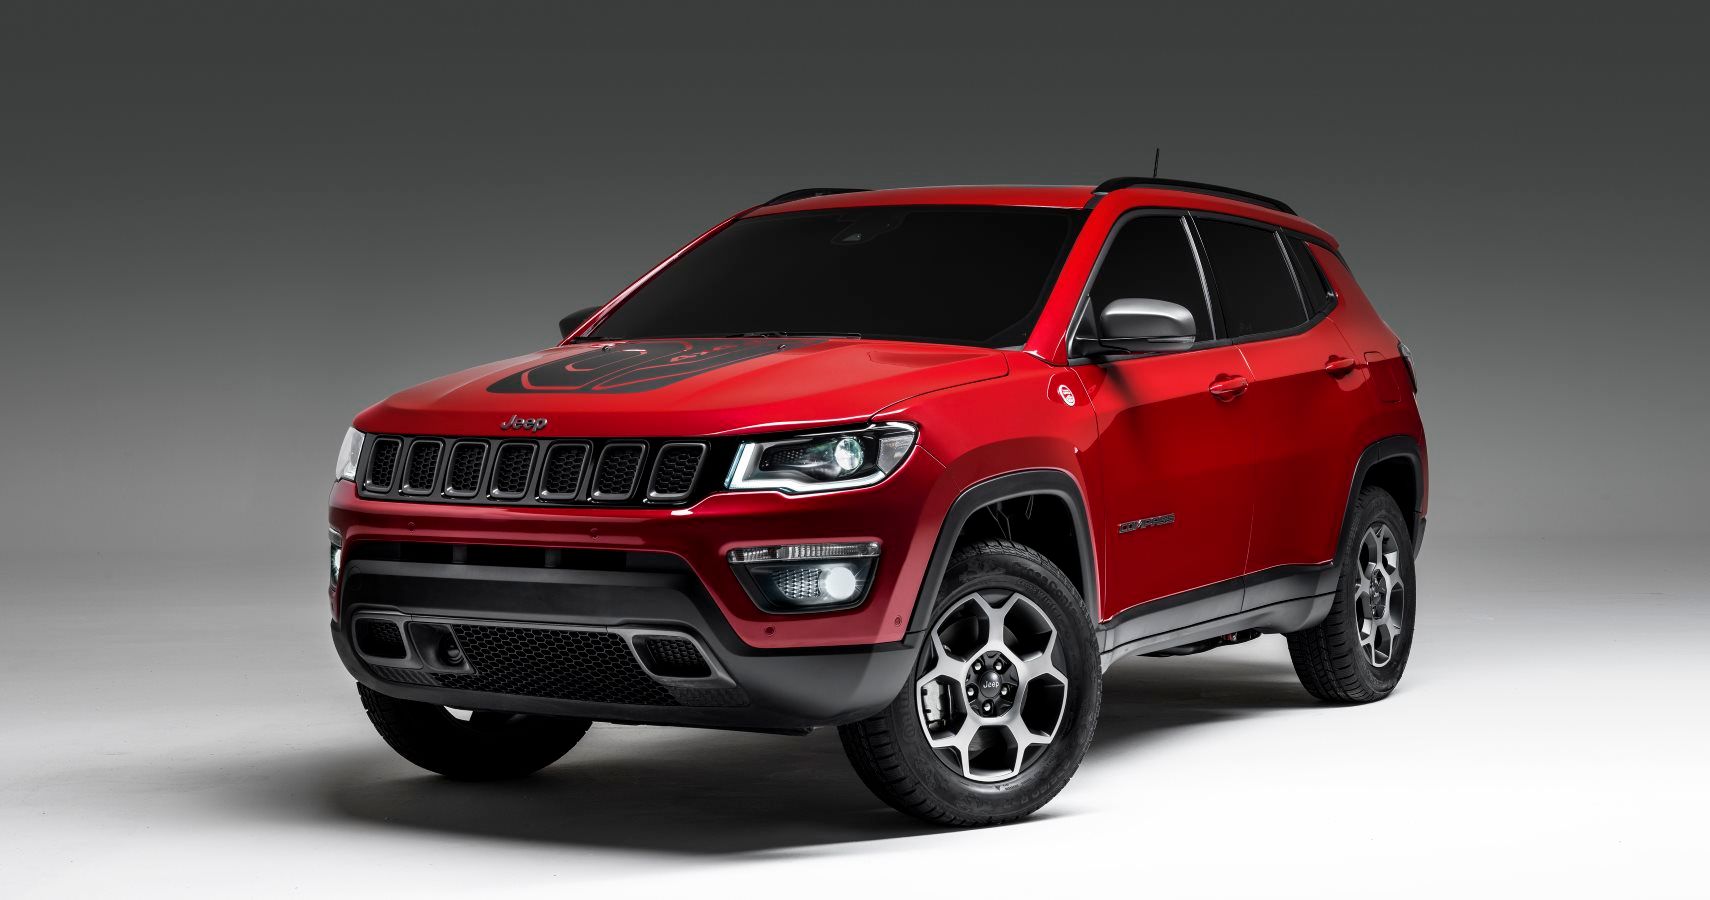 Jeep Finally Embraces Electrification With Plug In Hybrid Compass Renegade